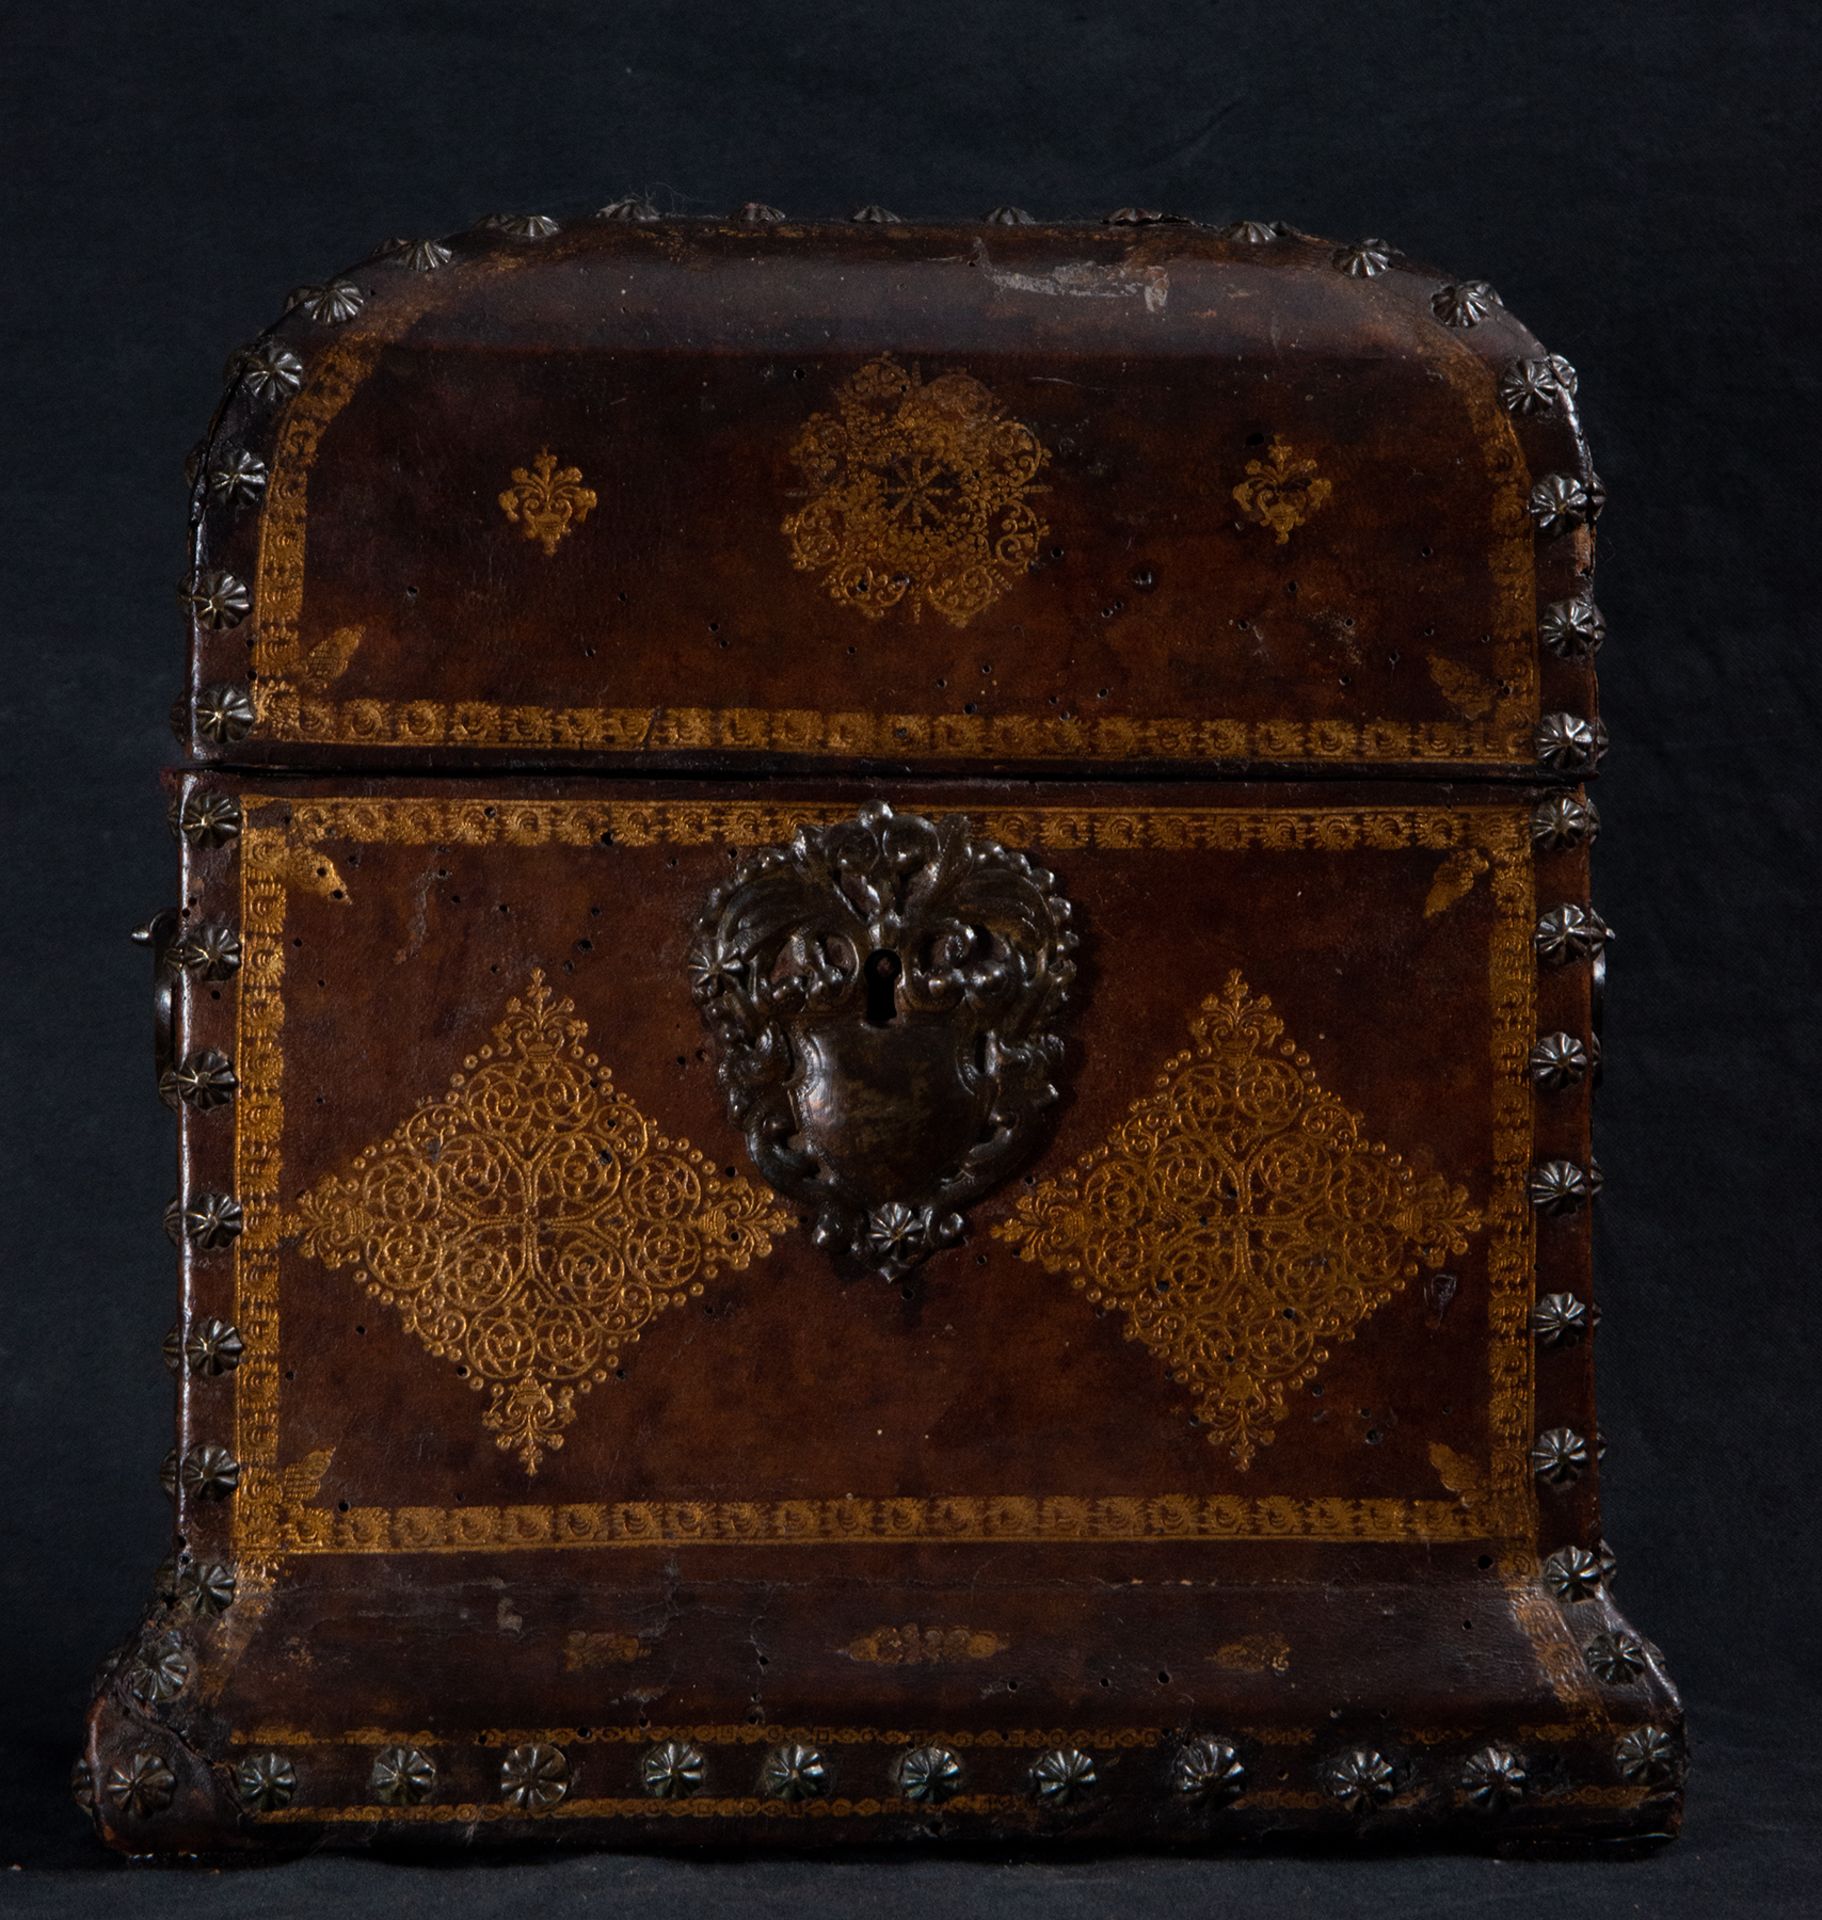 Document holder in gilt embossed leather, end of the 16th century